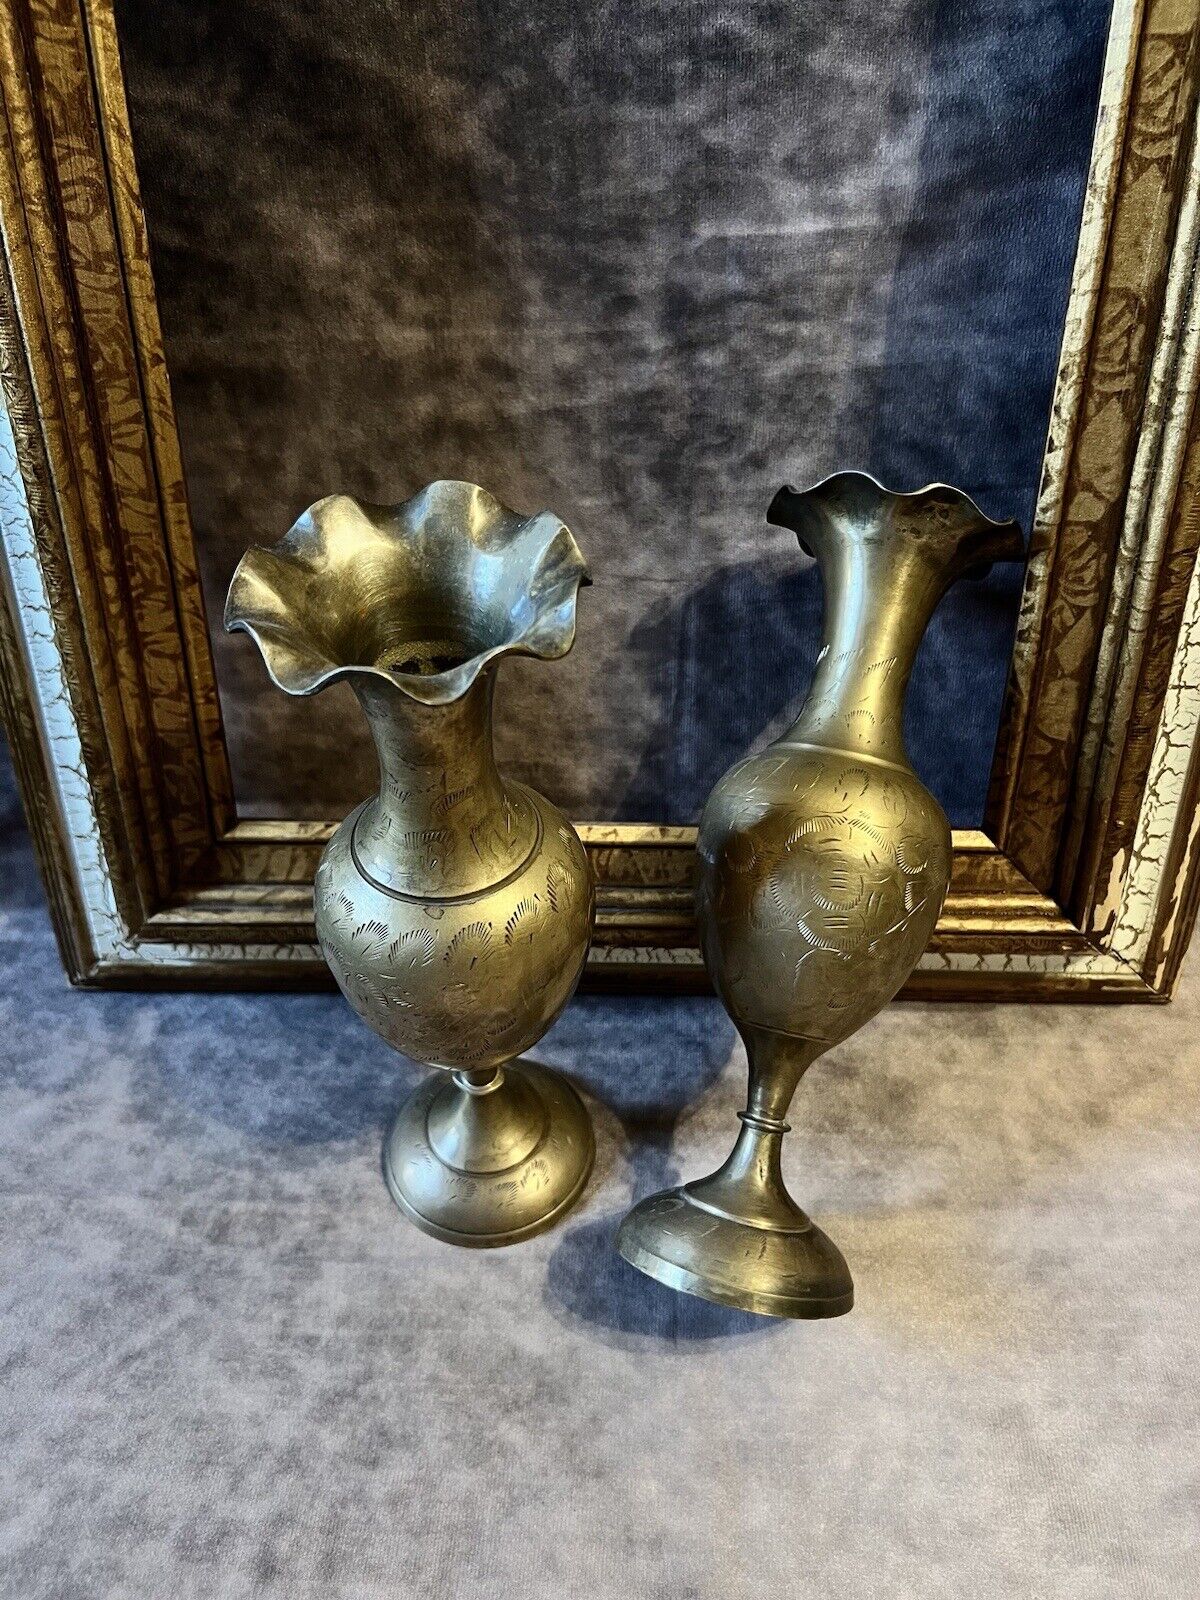 Pair of Vintage Brass Vases with Floral and Leaf Etchings, Made in India Used